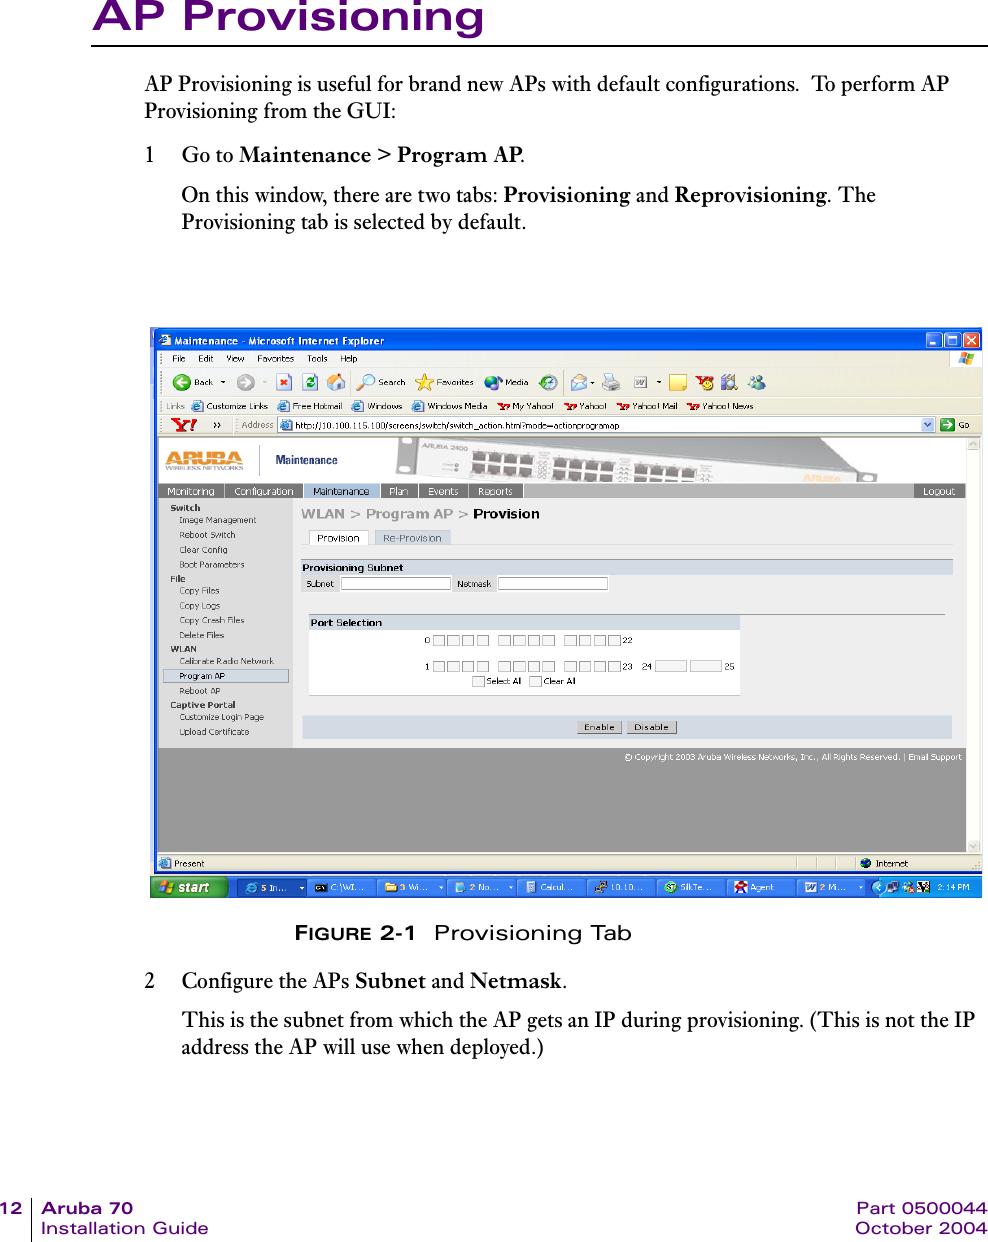 12 Aruba 70 Part 0500044Installation Guide October 2004AP ProvisioningAP Provisioning is useful for brand new APs with default configurations.  To perform AP Provisioning from the GUI:1Go to Maintenance &gt; Program AP.On this window, there are two tabs: Provisioning and Reprovisioning. The Provisioning tab is selected by default.FIGURE 2-1  Provisioning Tab2 Configure the APs Subnet and Netmask. This is the subnet from which the AP gets an IP during provisioning. (This is not the IP address the AP will use when deployed.)